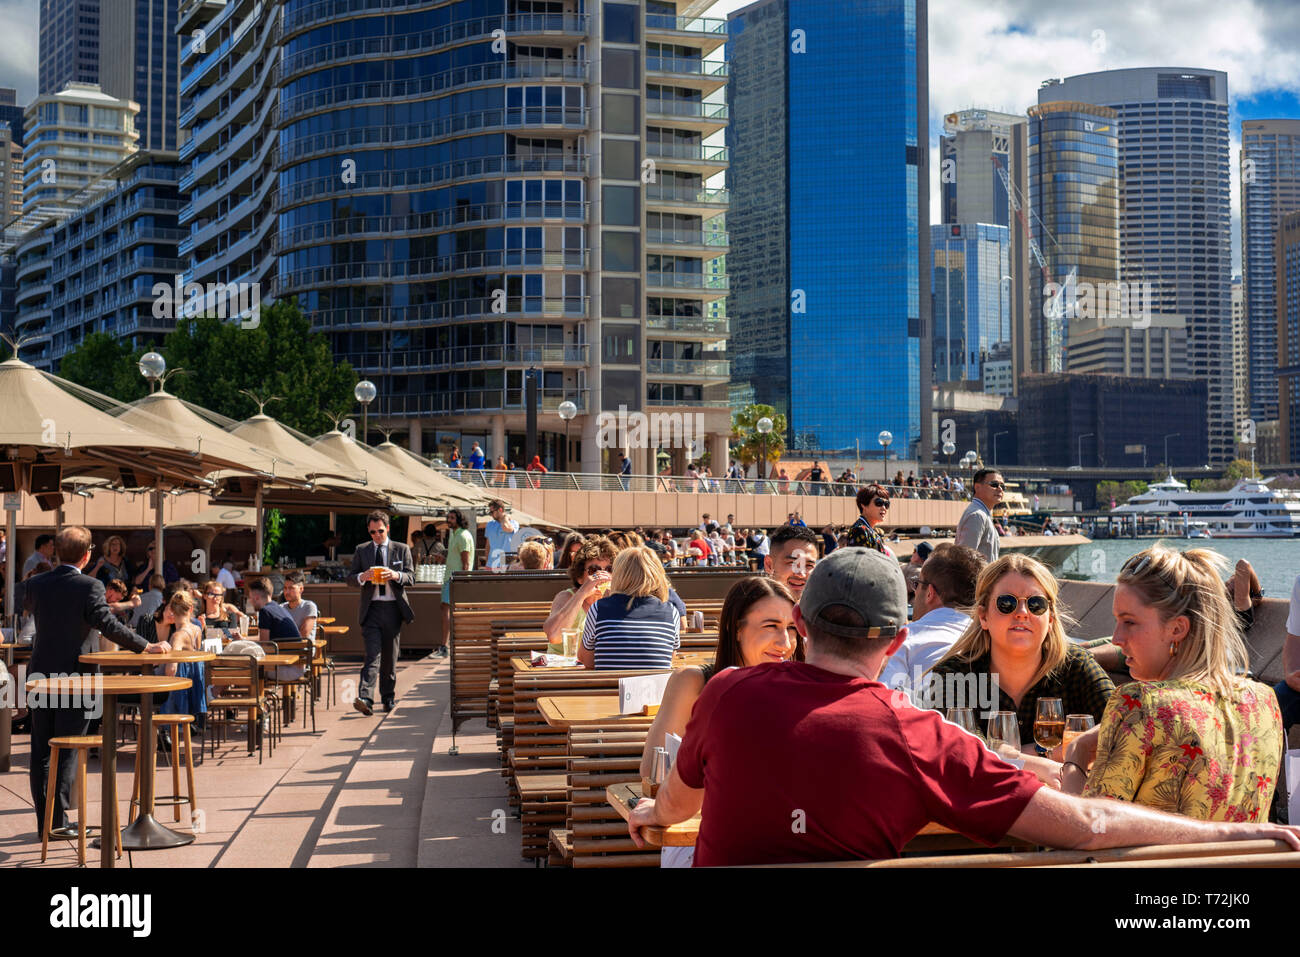 Bars and restaurants in the promenade Circular Quay next to the Opera House in Sydney, Australia Stock Photo